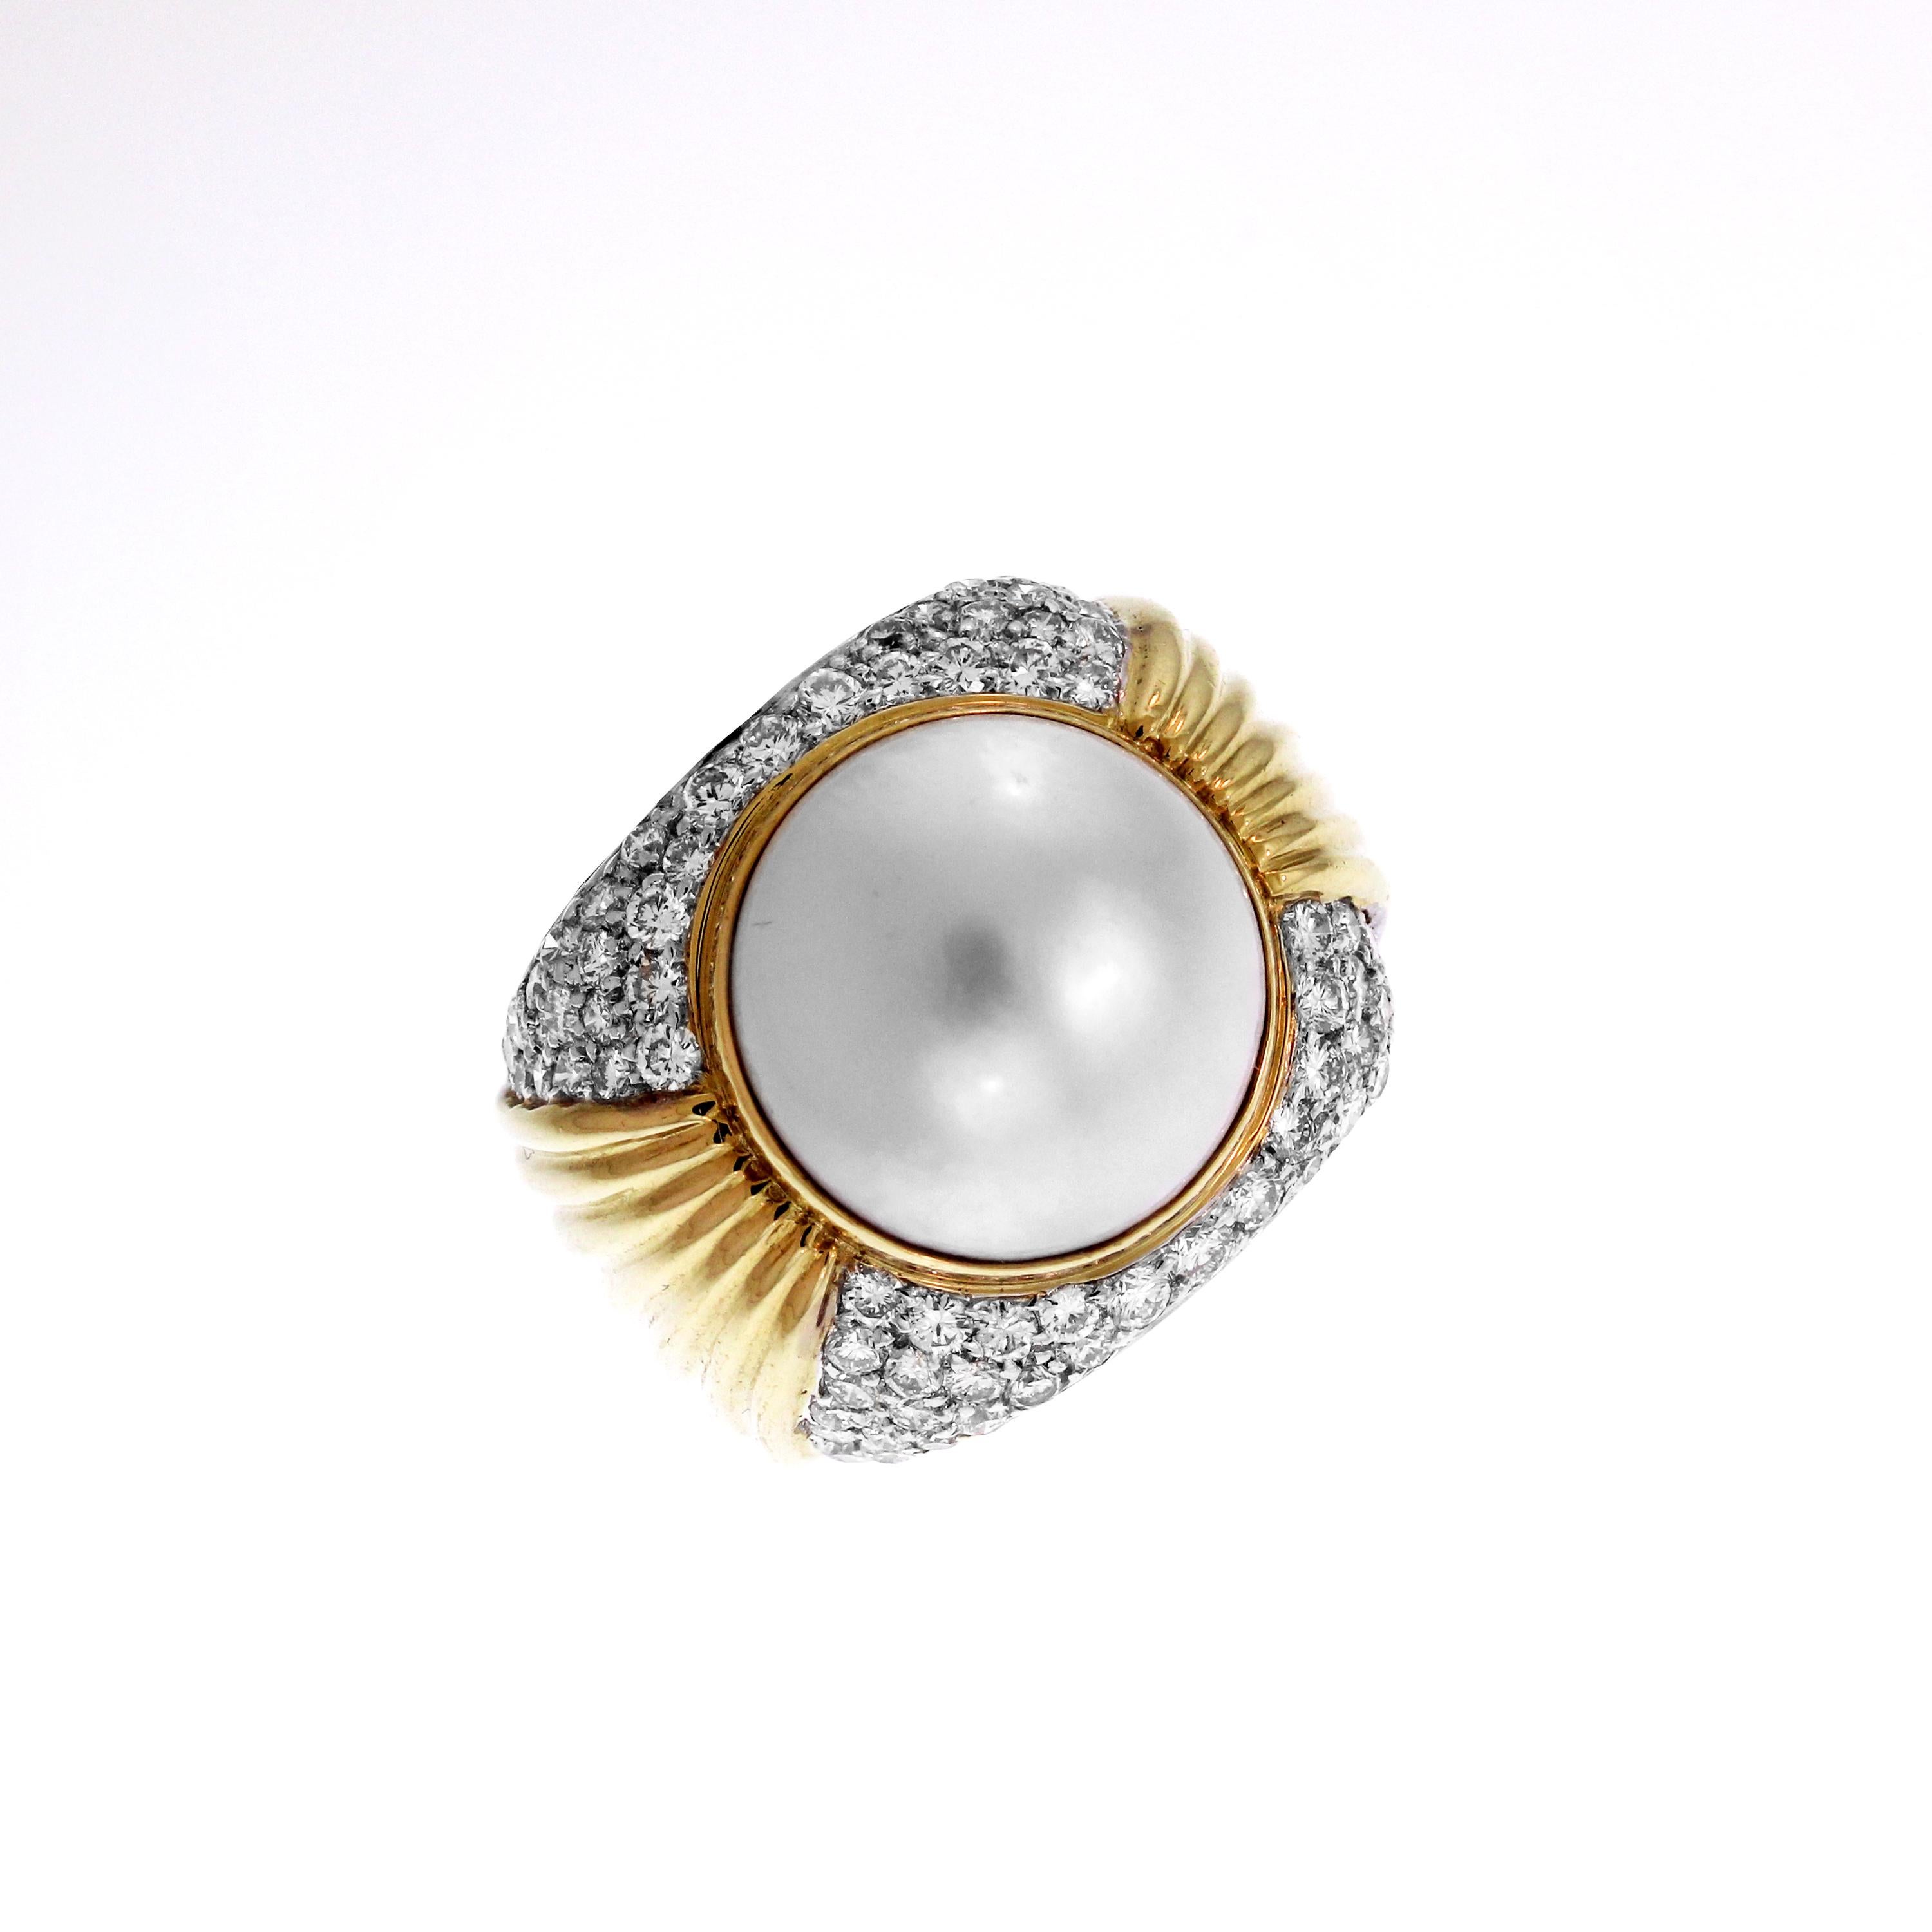 IF YOU ARE REALLY INTERESTED, CONTACT US WITH ANY REASONABLE OFFER. WE WILL TRY OUR BEST TO MAKE YOU HAPPY!

18K Yellow Gold and Diamond Ring with Button Pearl Center

Freshwater Button Pearl center surrounded by White Diamonds and Shell like design